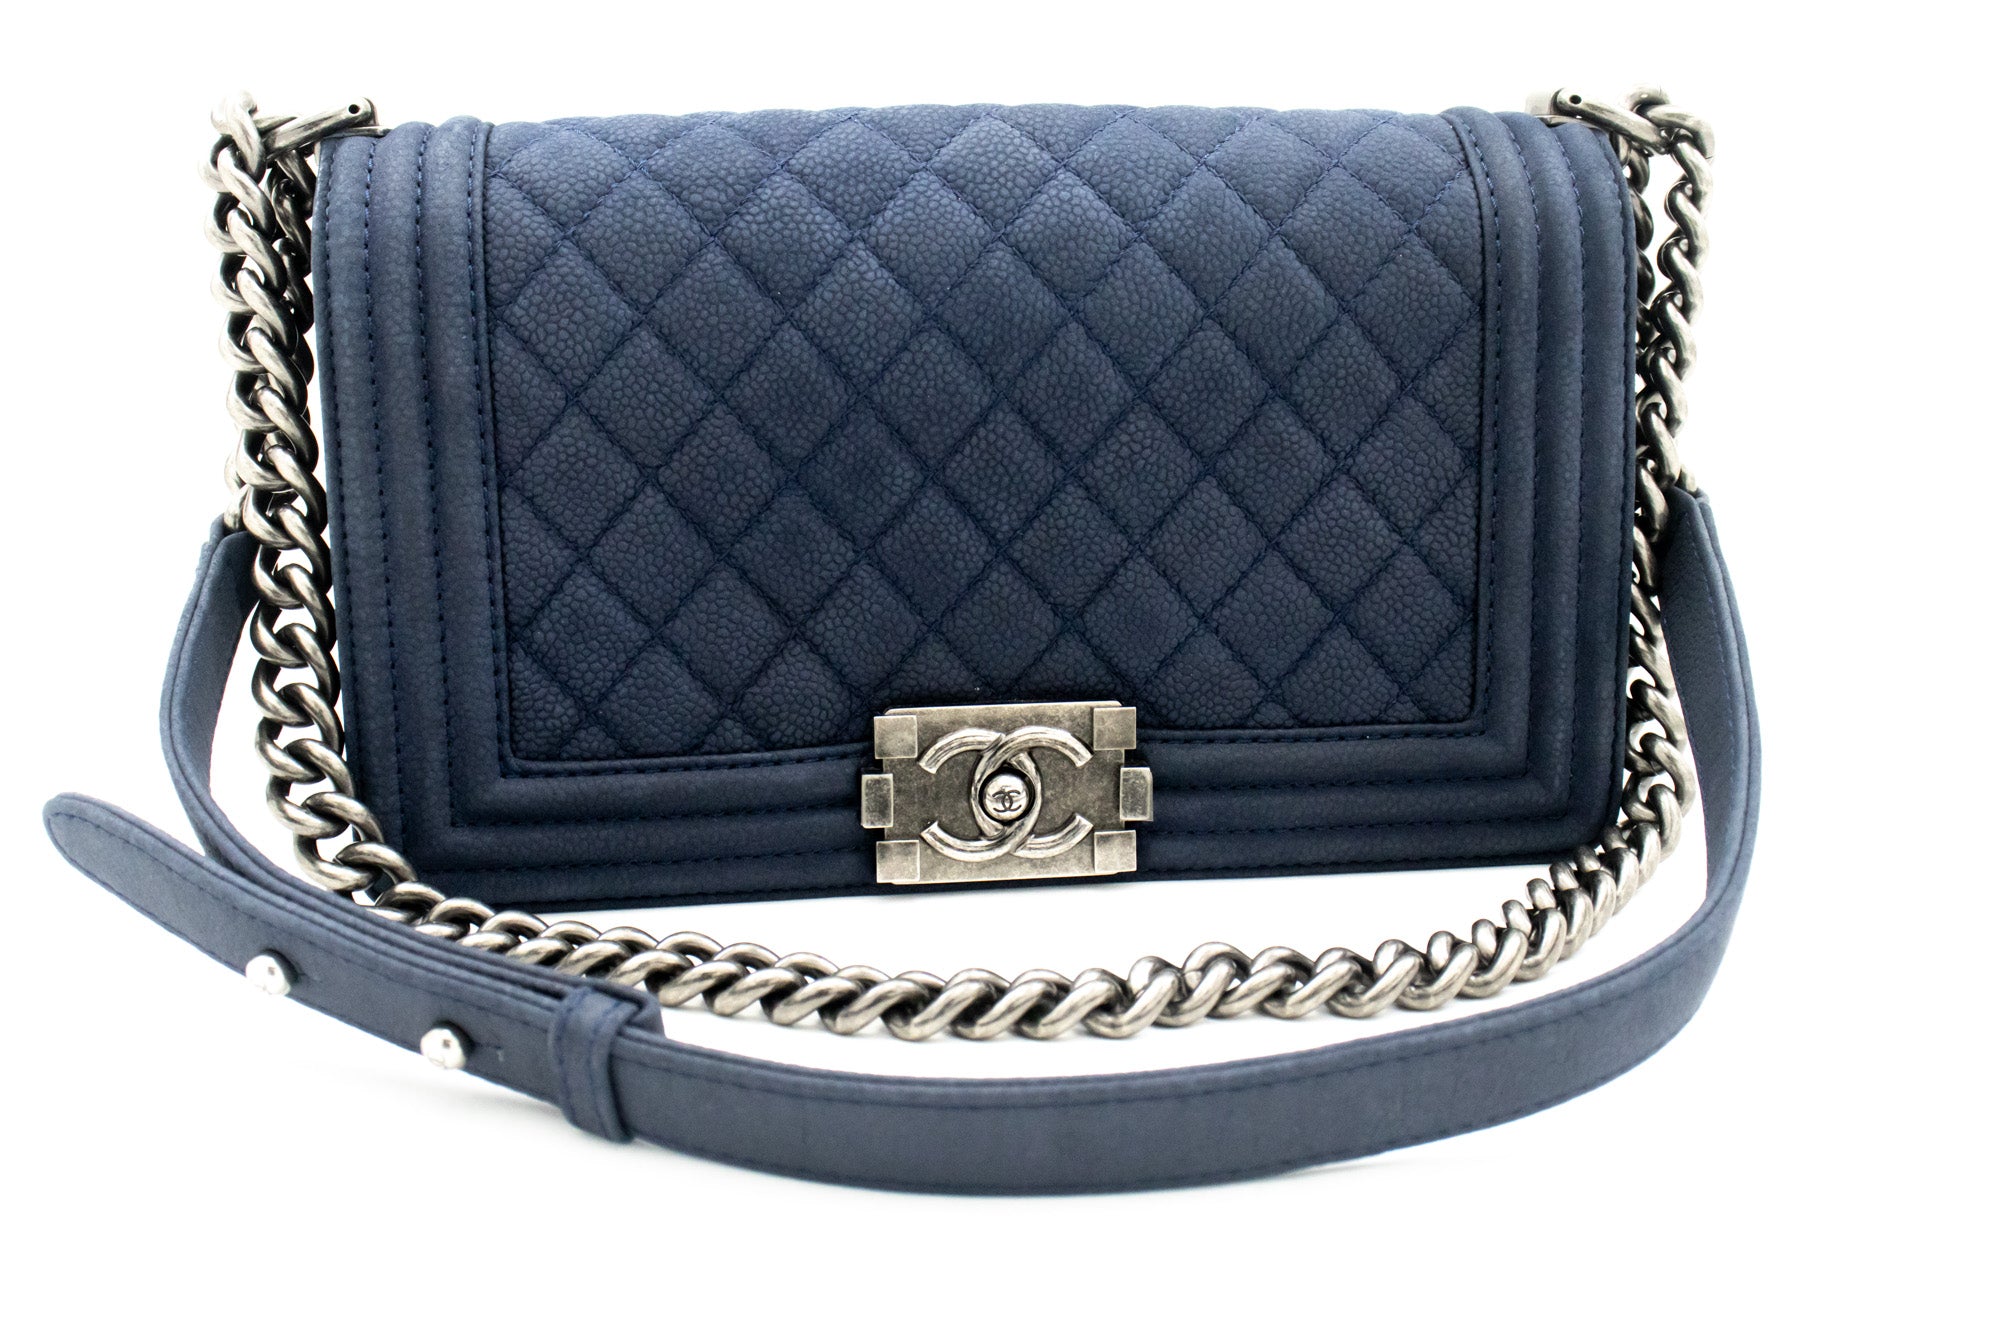 Blue Chanel Grained Leather Tote